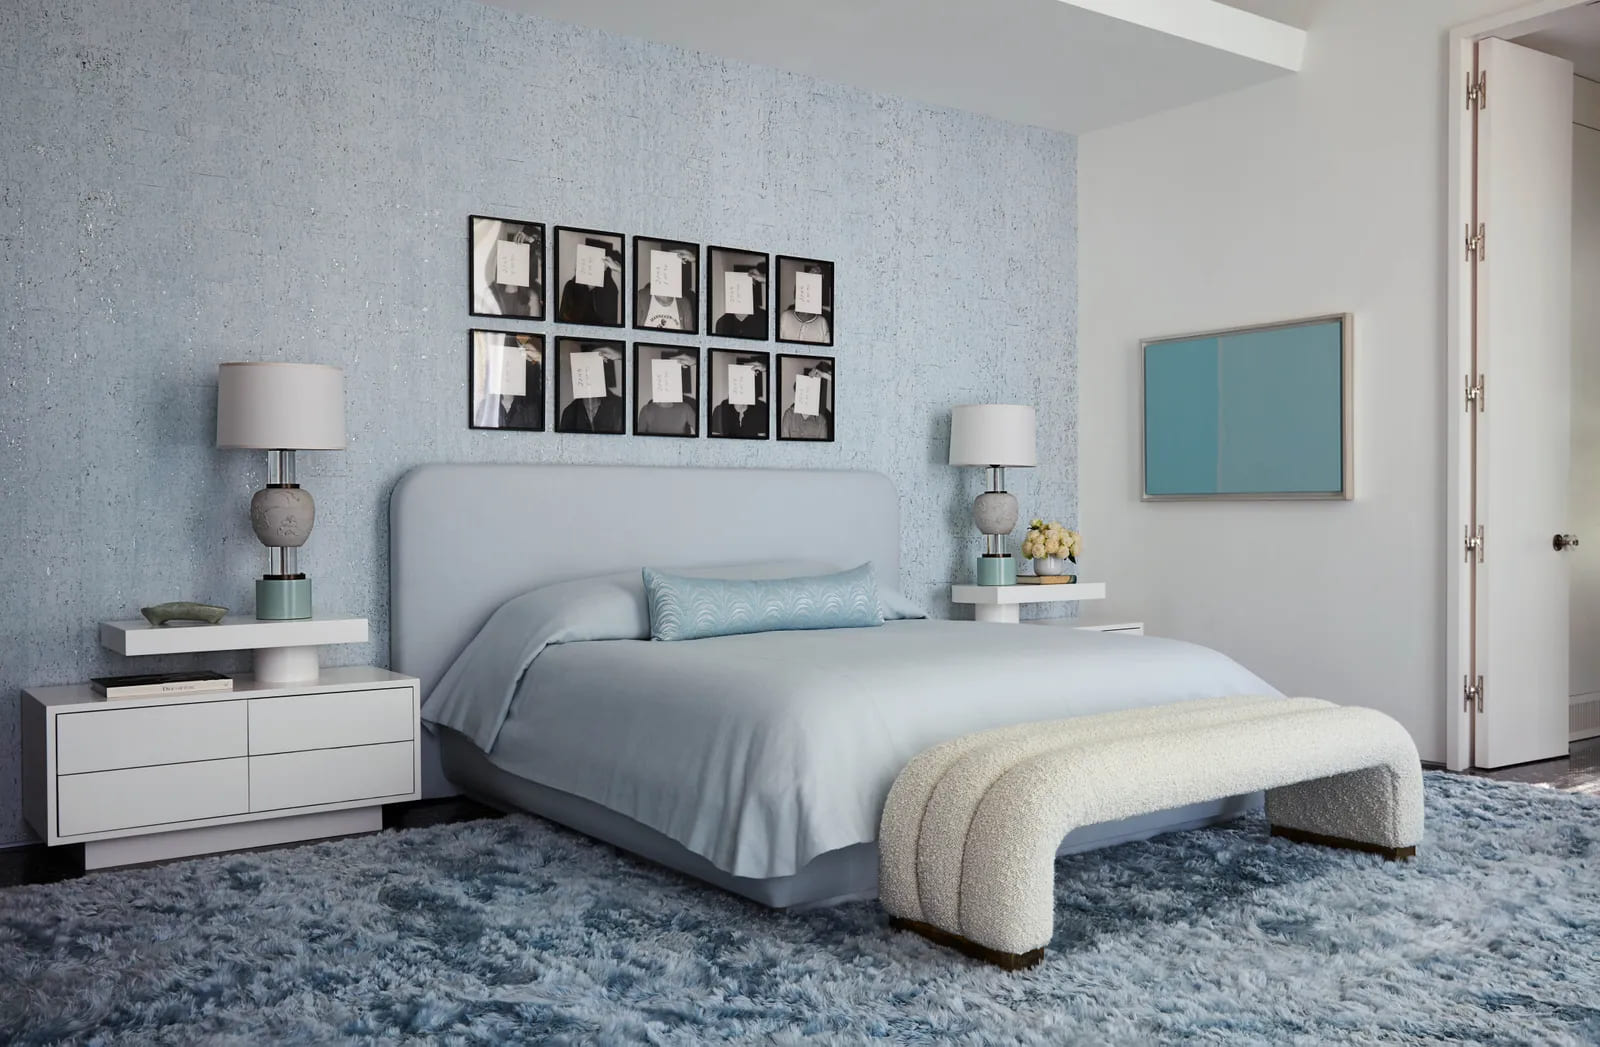 Modern bedroom following a baby blue color pallete